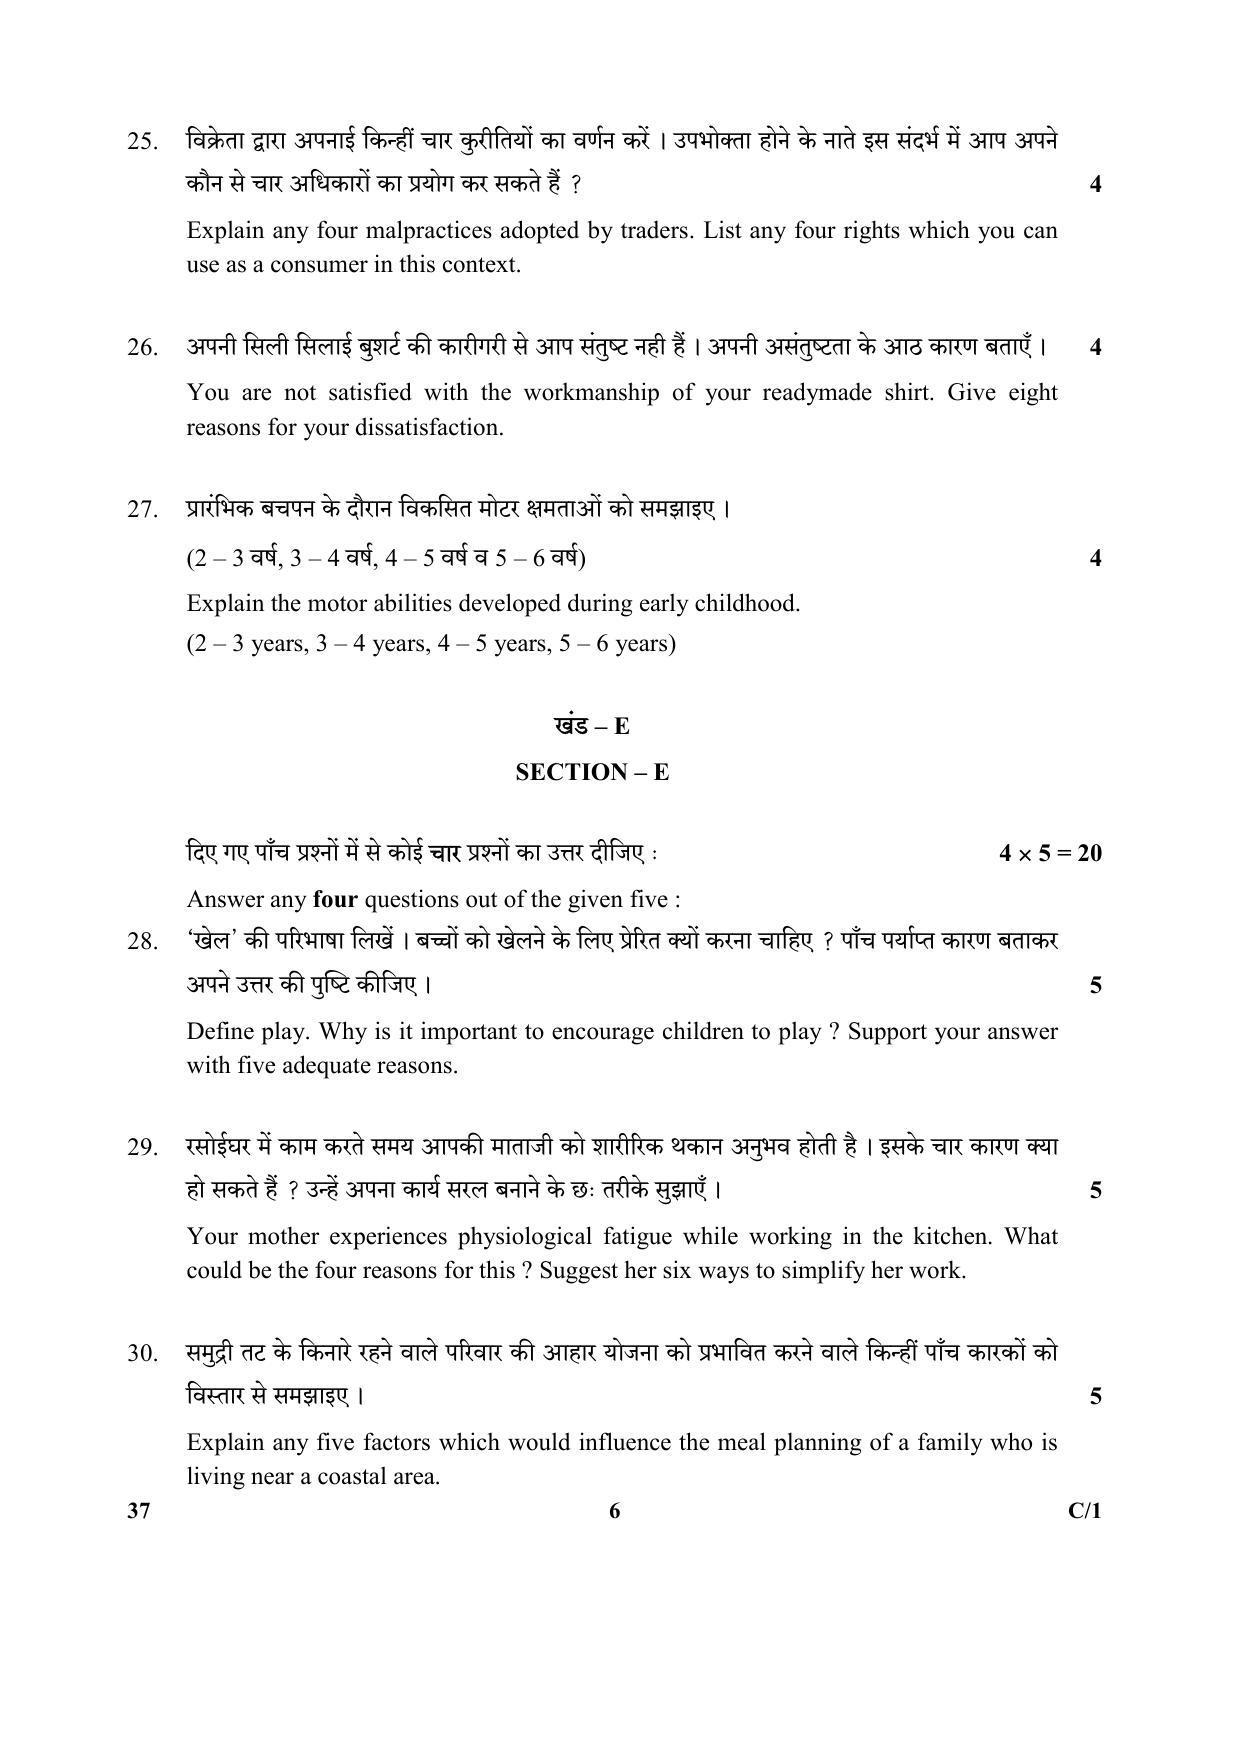 CBSE Class 10 37 (Home Science) 2018 Compartment Question Paper - Page 6